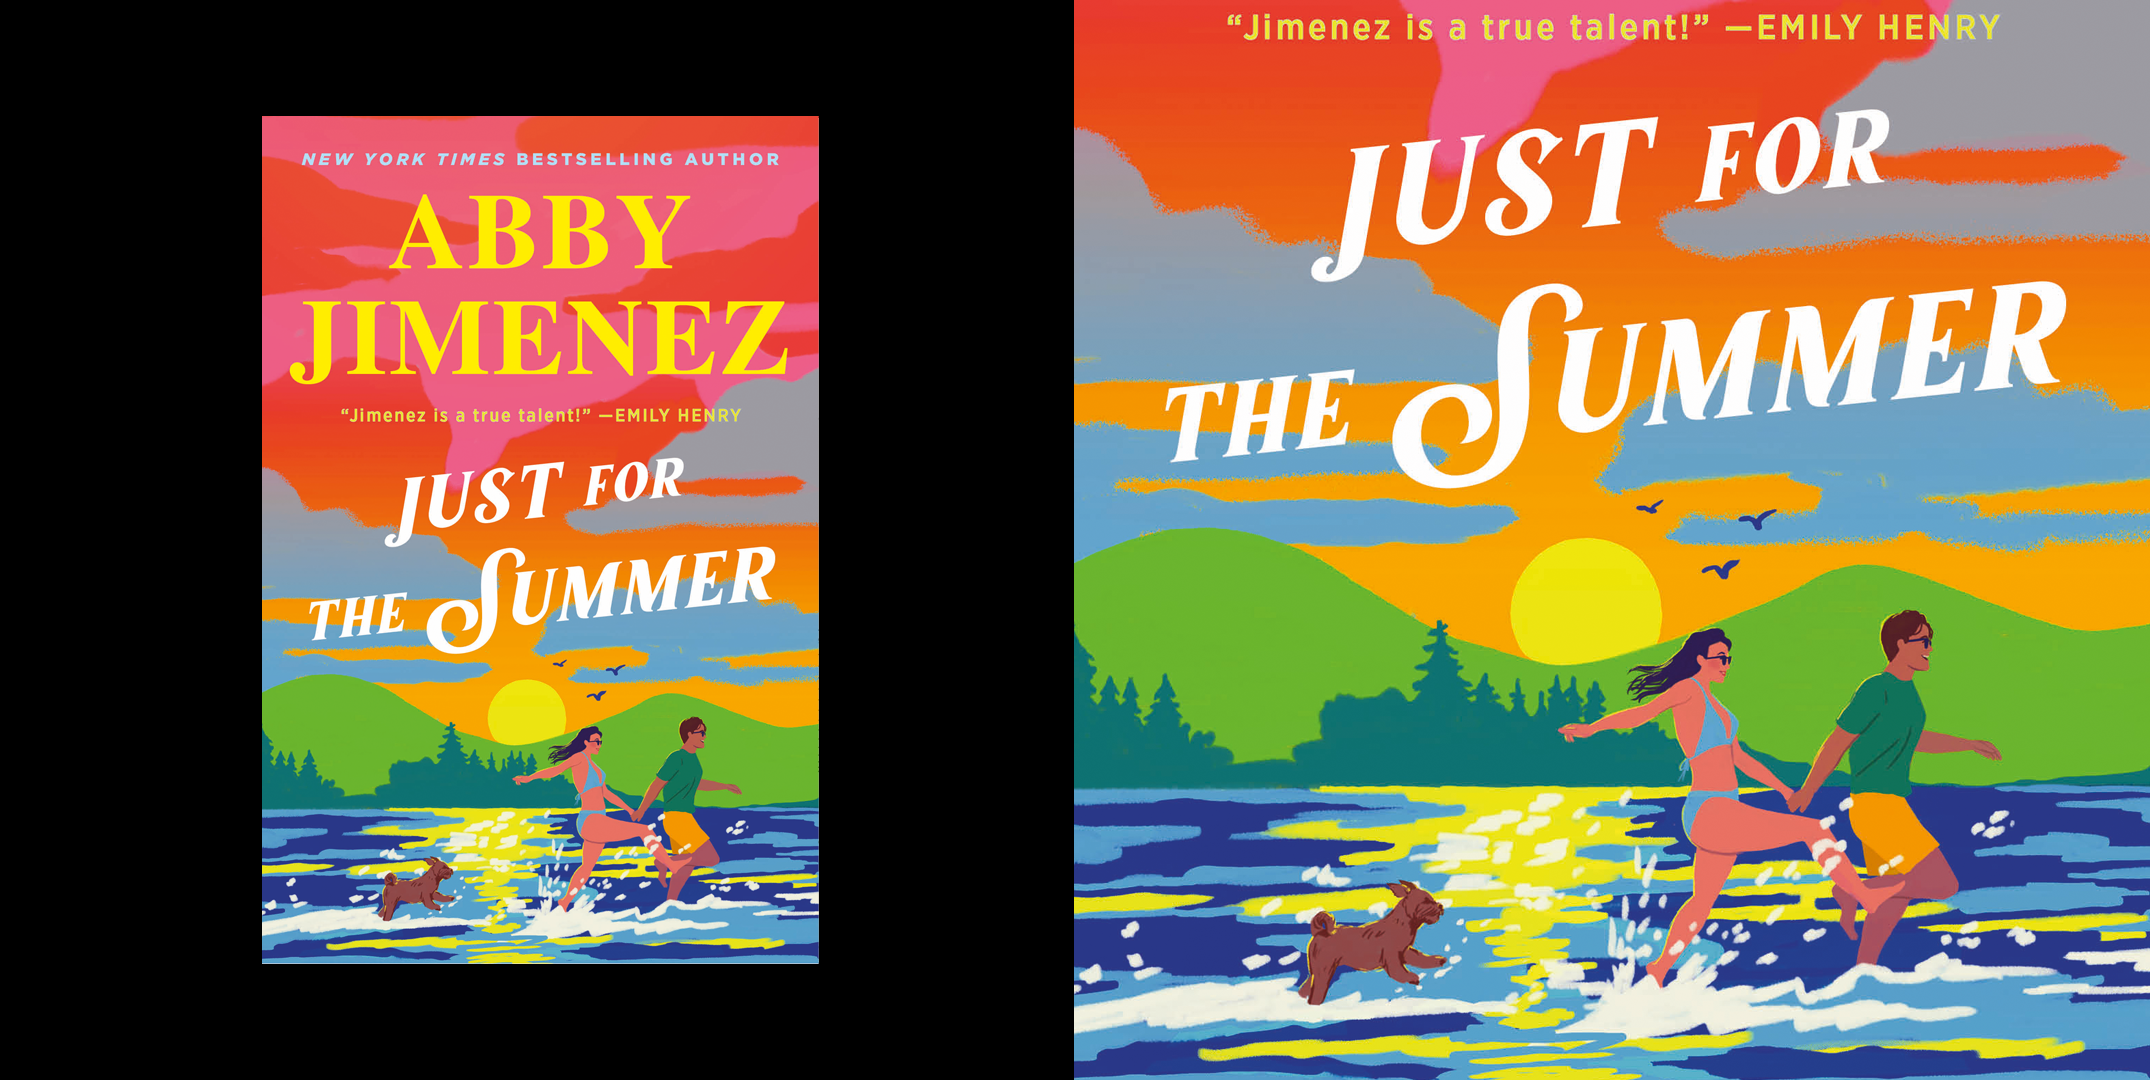 Read 'Just for the Summer' by Abby Jimenez Book Excerpt, See Cover